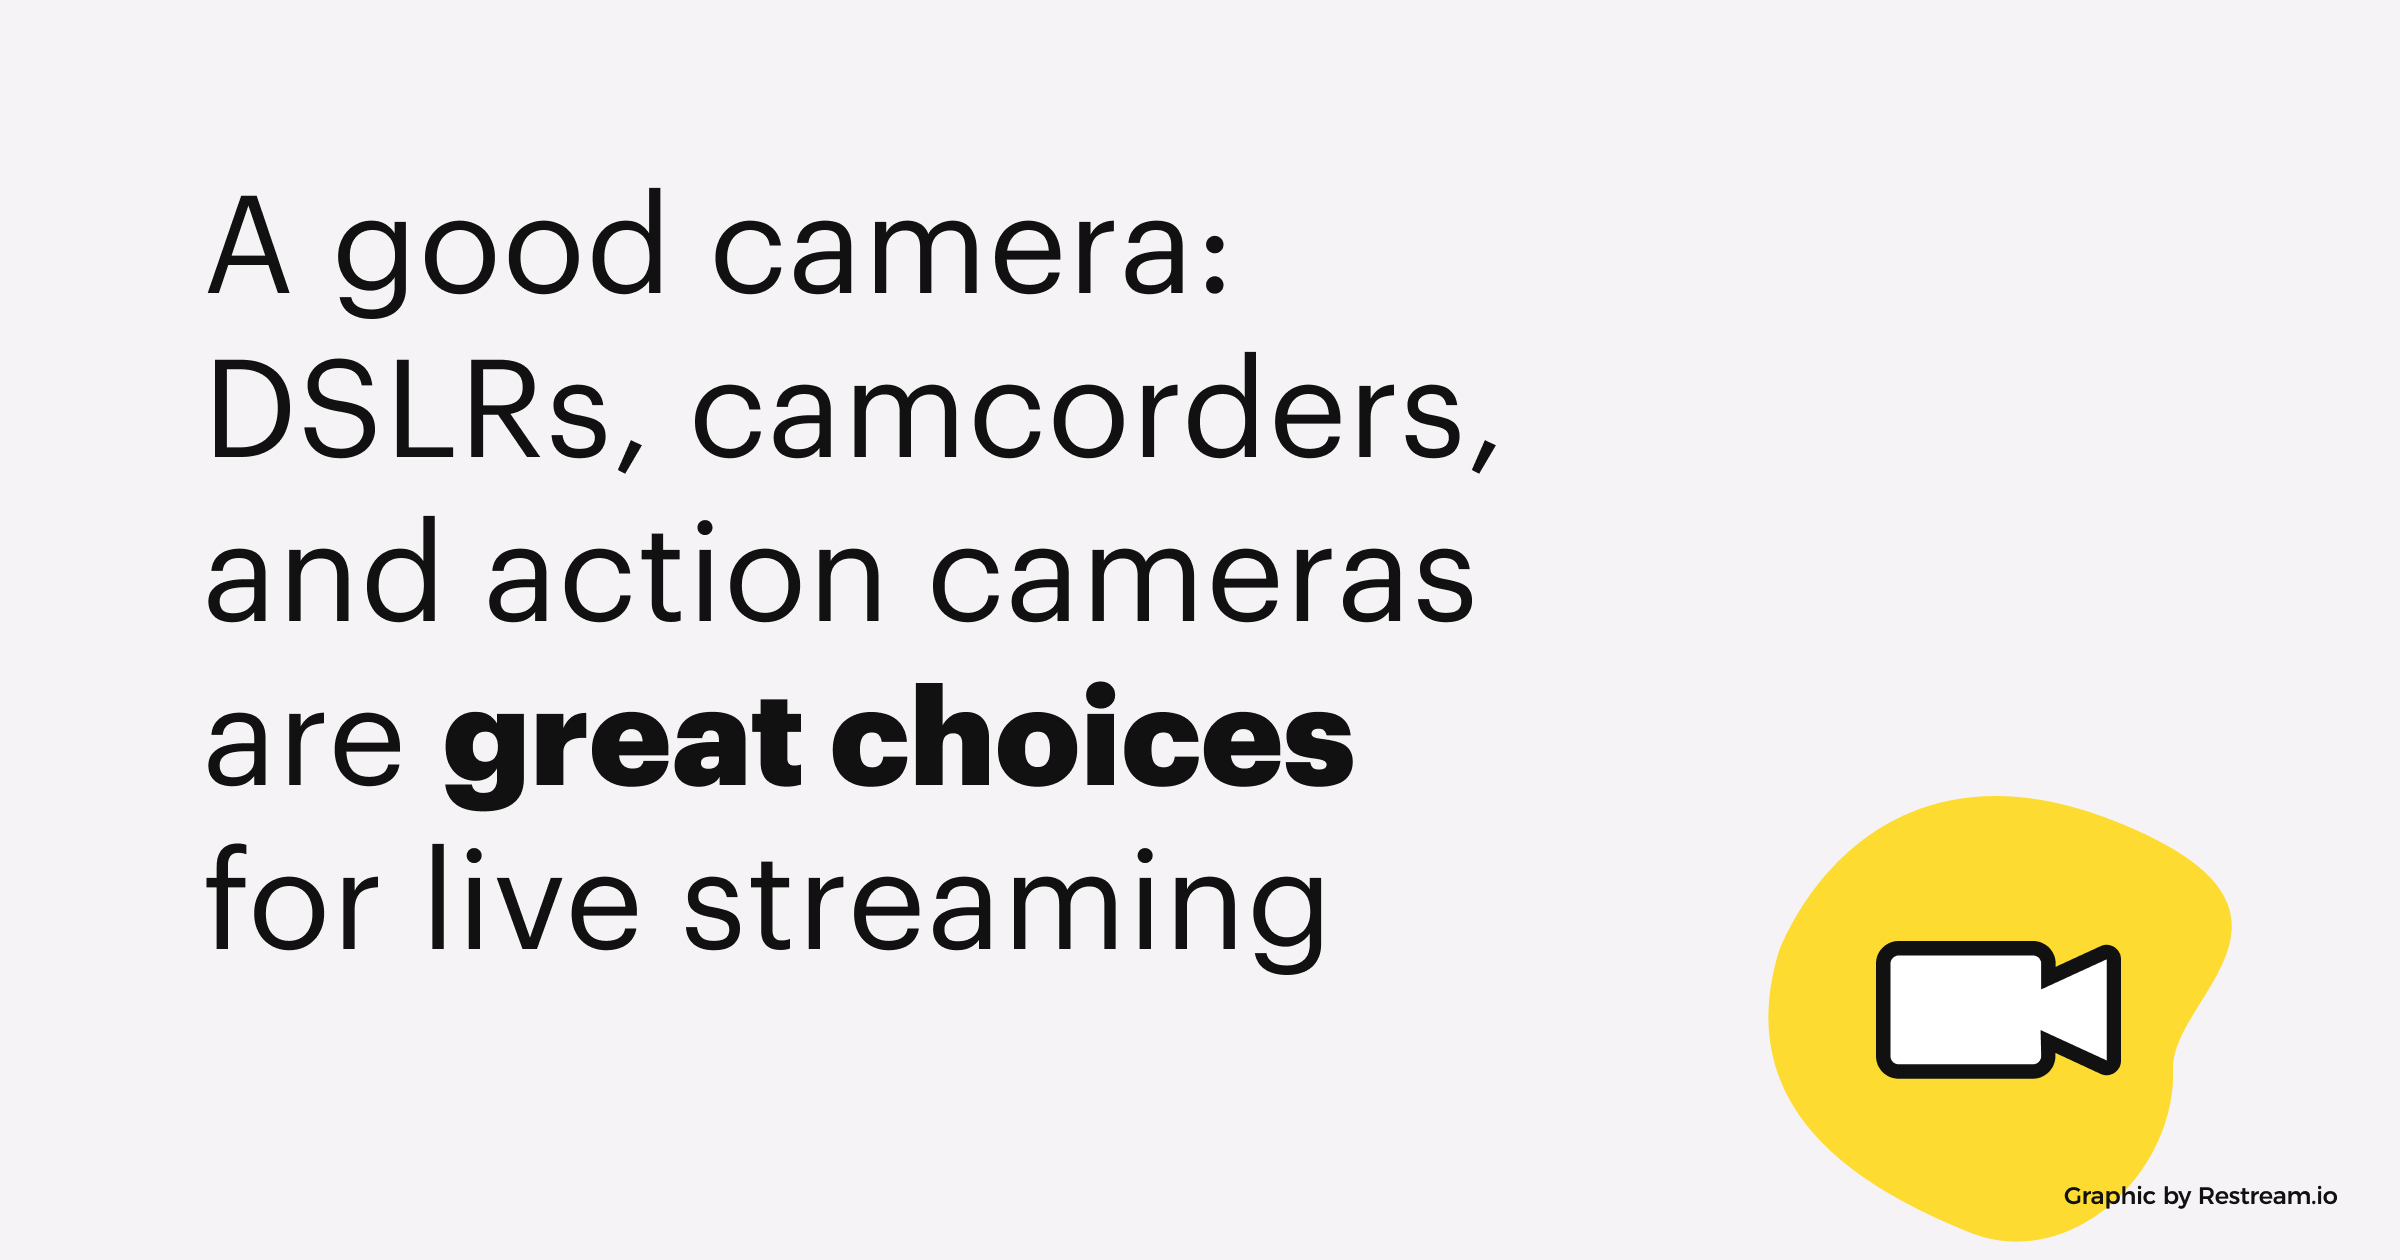 A good camera: DSLRs, camcorders, and action cameras are great choices for live streaming